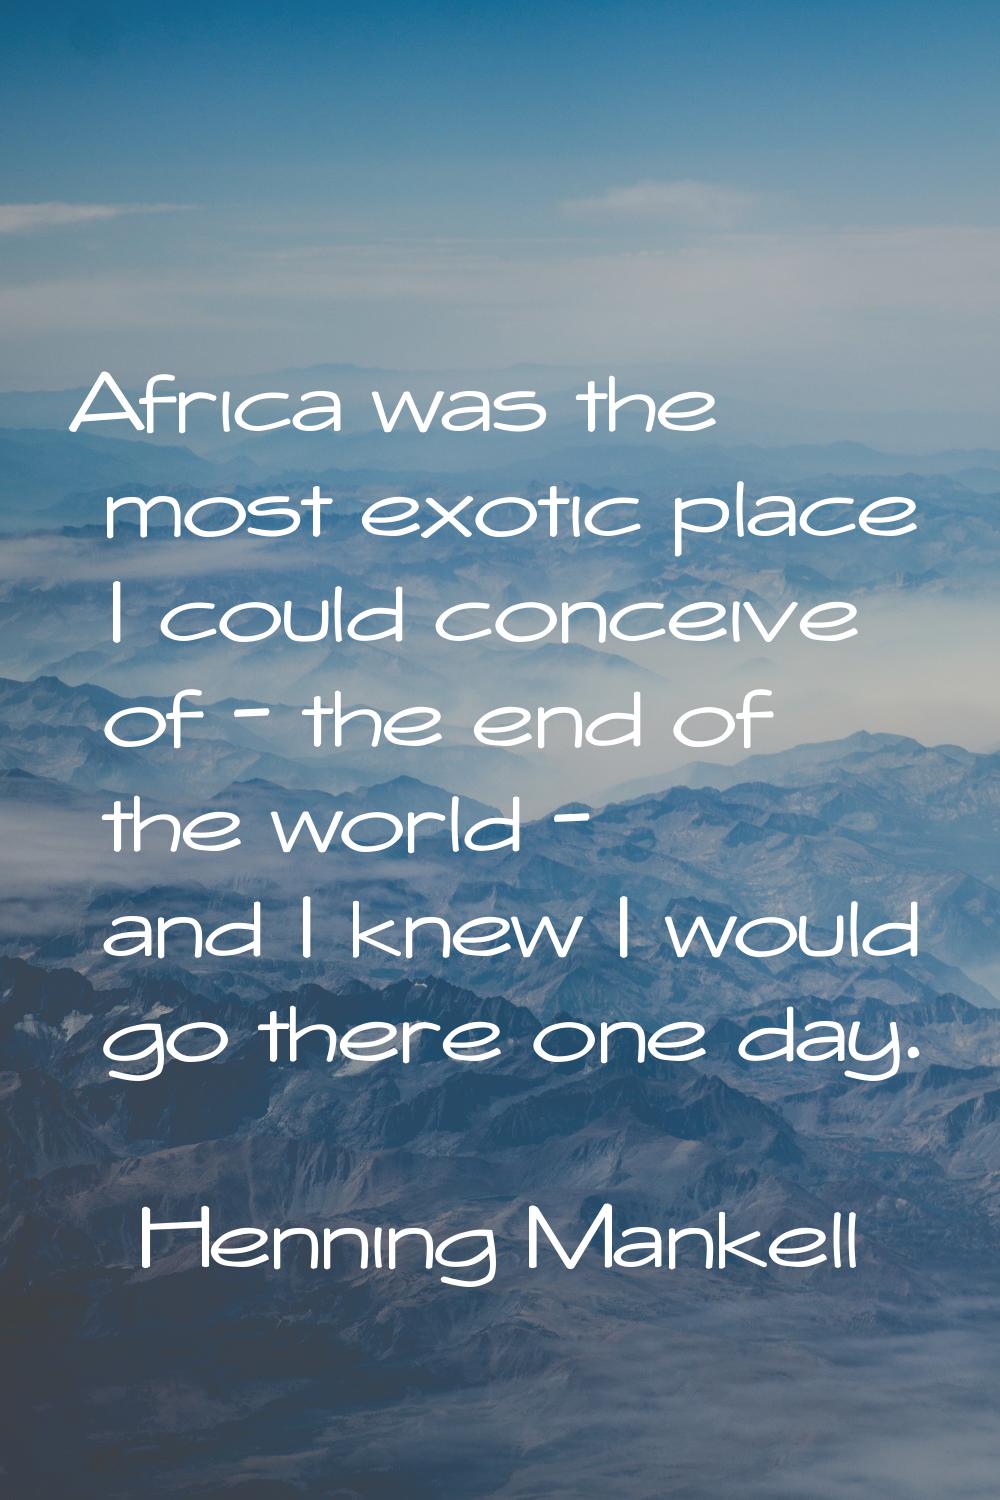 Africa was the most exotic place I could conceive of - the end of the world - and I knew I would go